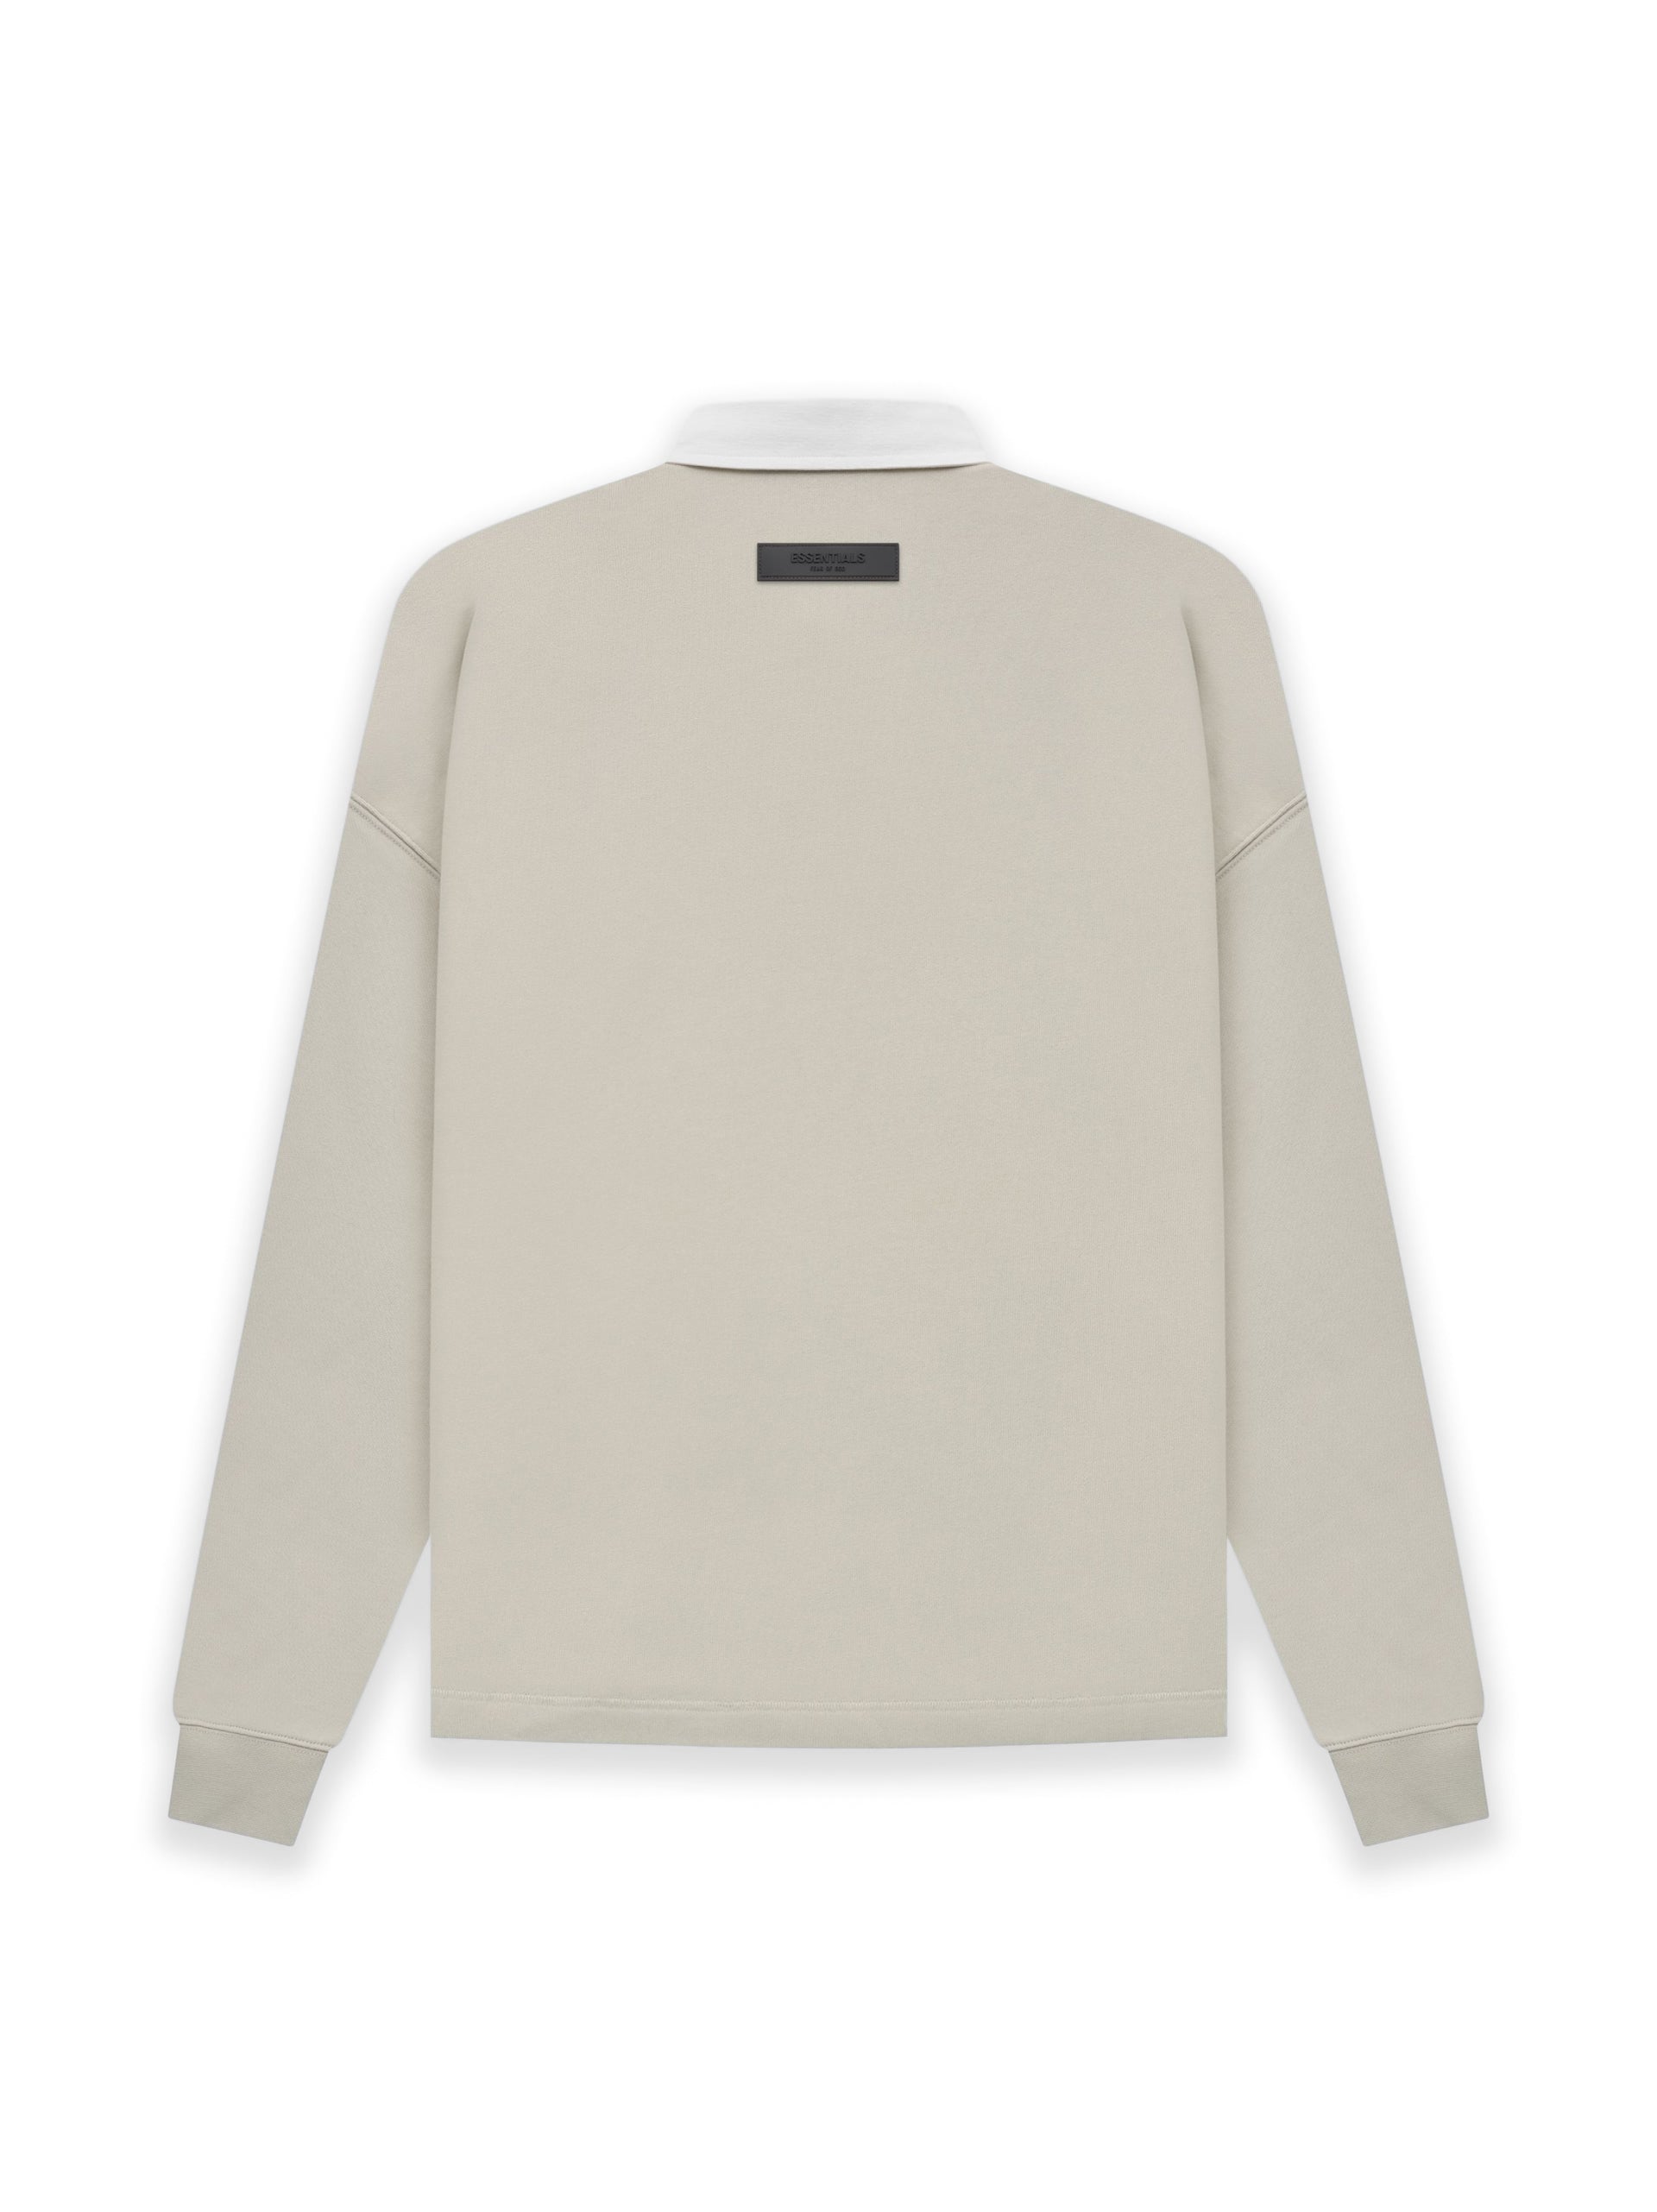 Fear of God Essentials | 1977 Rugby Sweat Wheat